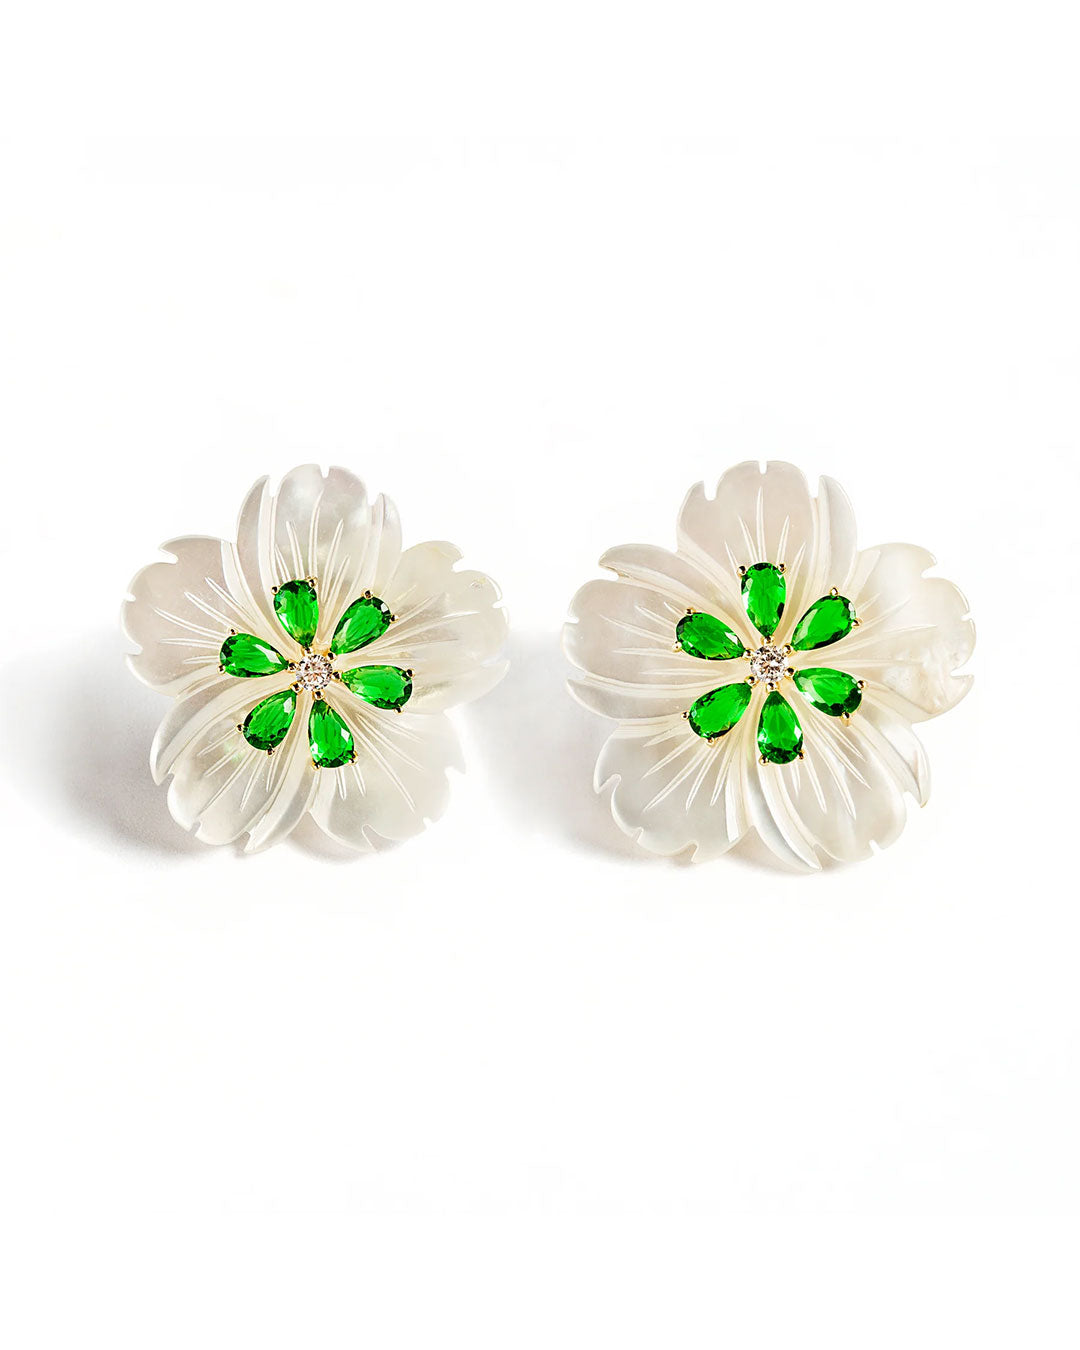 925 GOLD PLATED FLOWER EARRINGS WITH MOTHER OF PEARL AND GREEN CRYSTALS